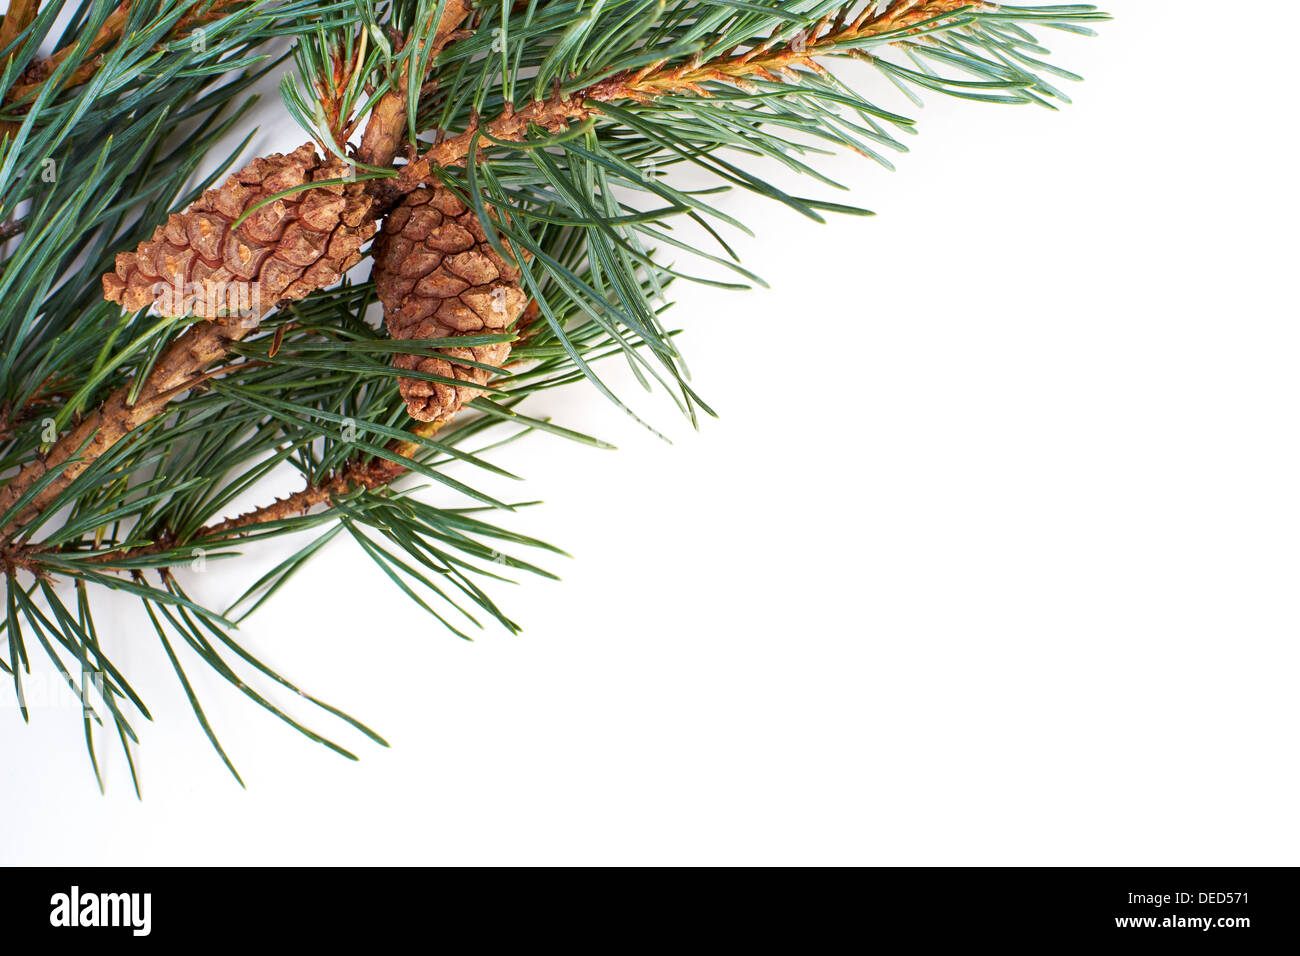 A Christmas pine tree branch and cone on a white background. Stock Photo